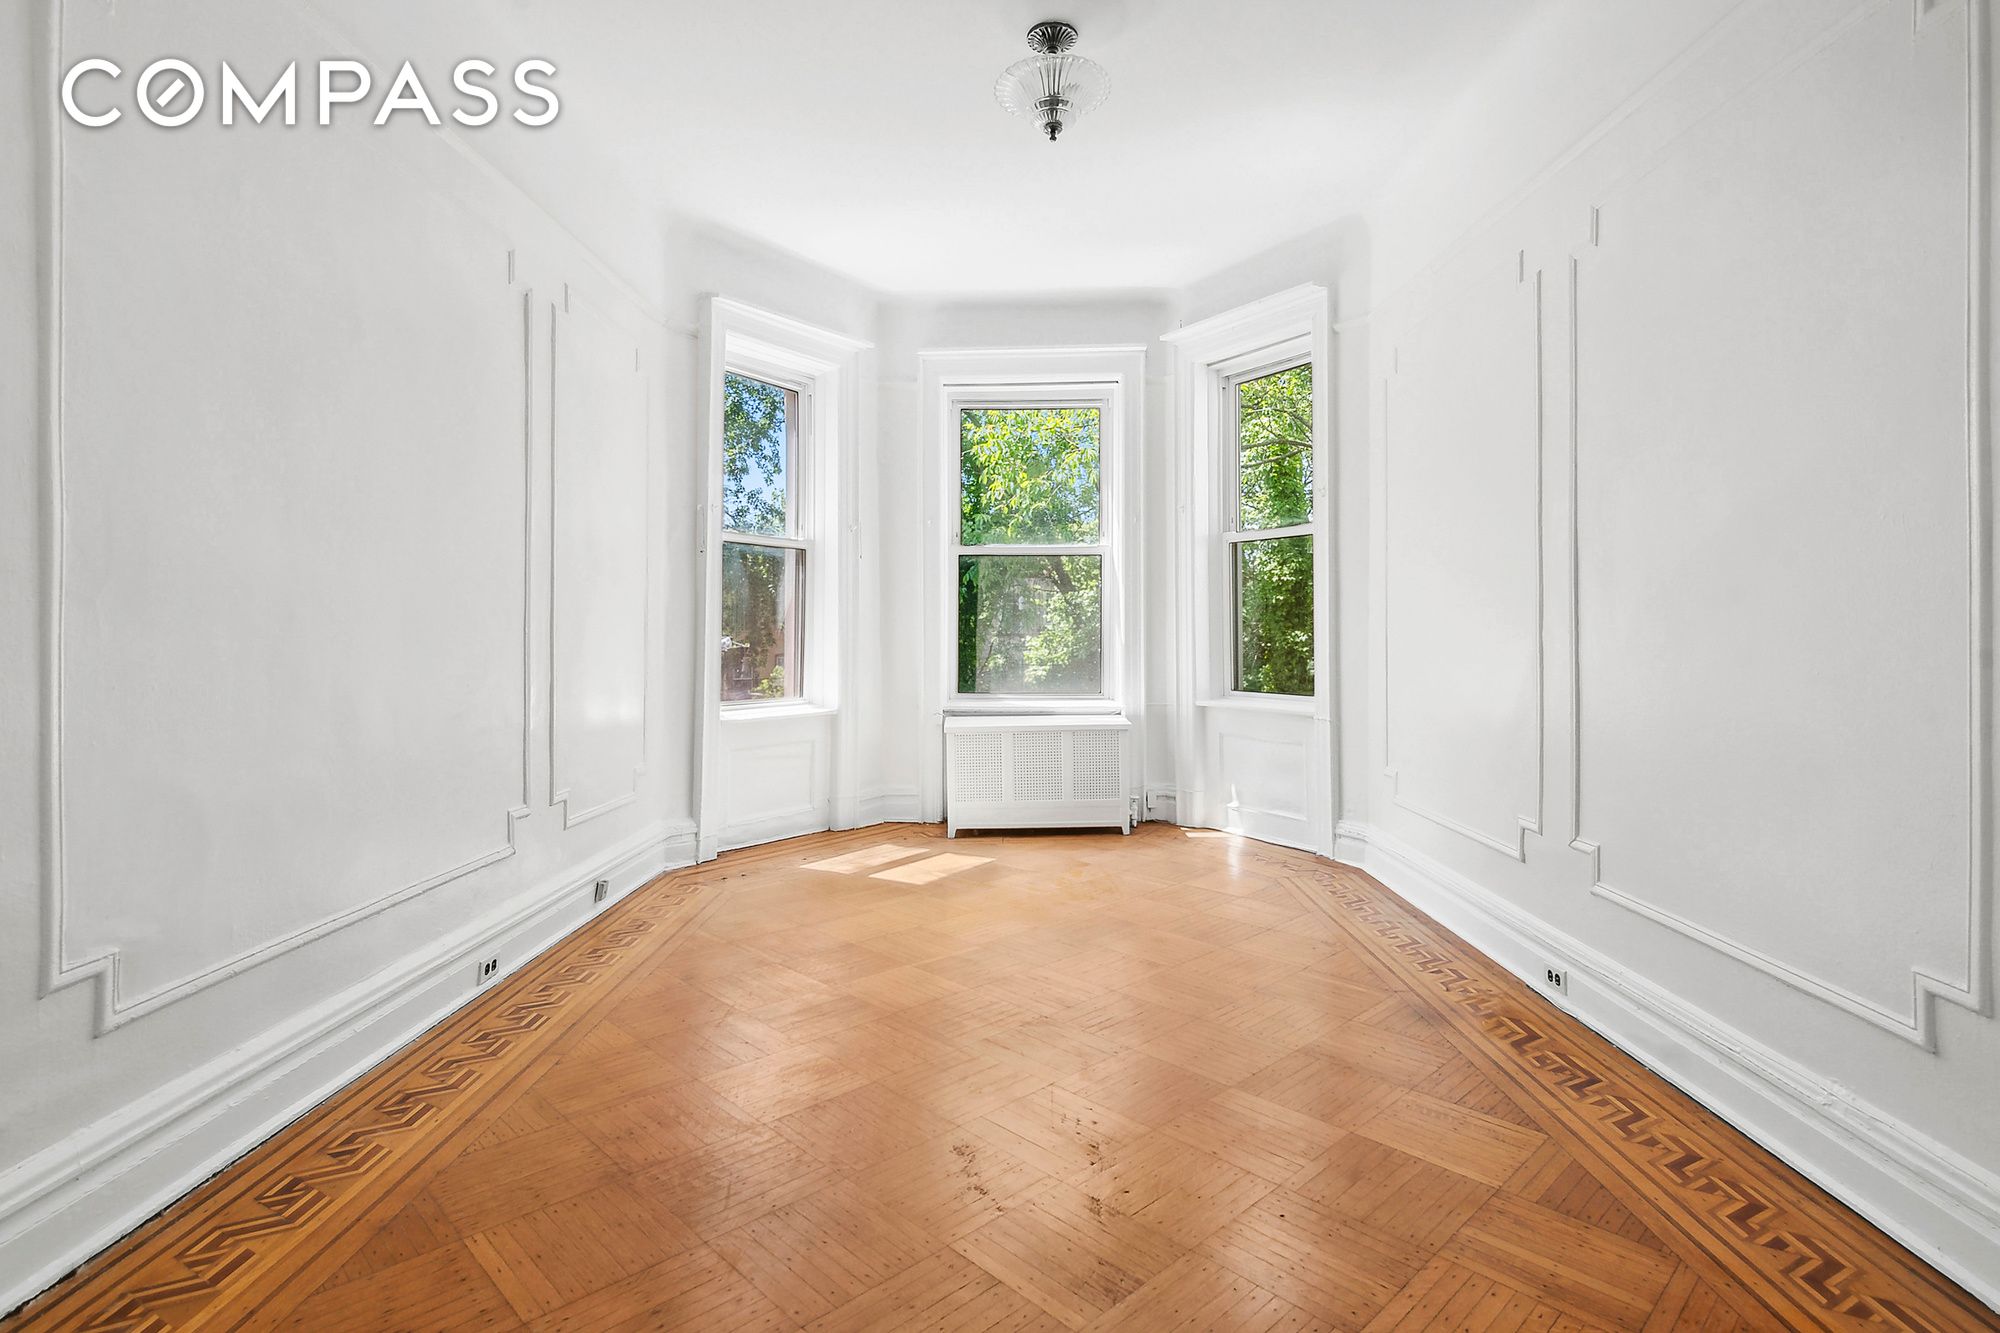 1098 Prospect Place 2, Crown Heights, Brooklyn, New York - 2 Bedrooms  
1 Bathrooms  
4 Rooms - 